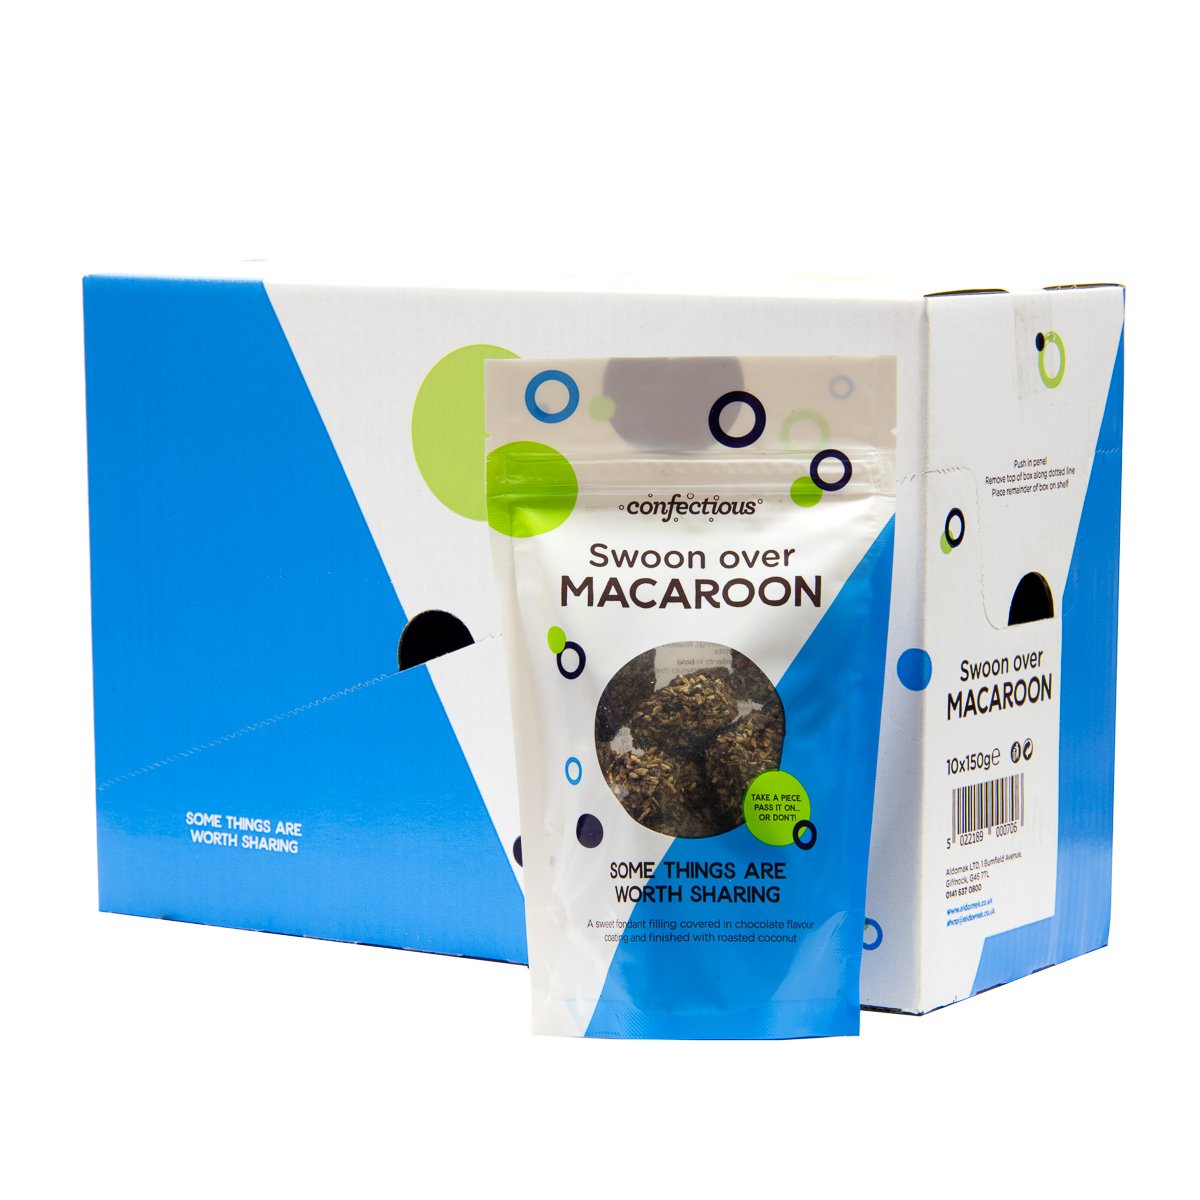 Scottish Swoon over Macaroon 10x150g Sharing Bags Confectious